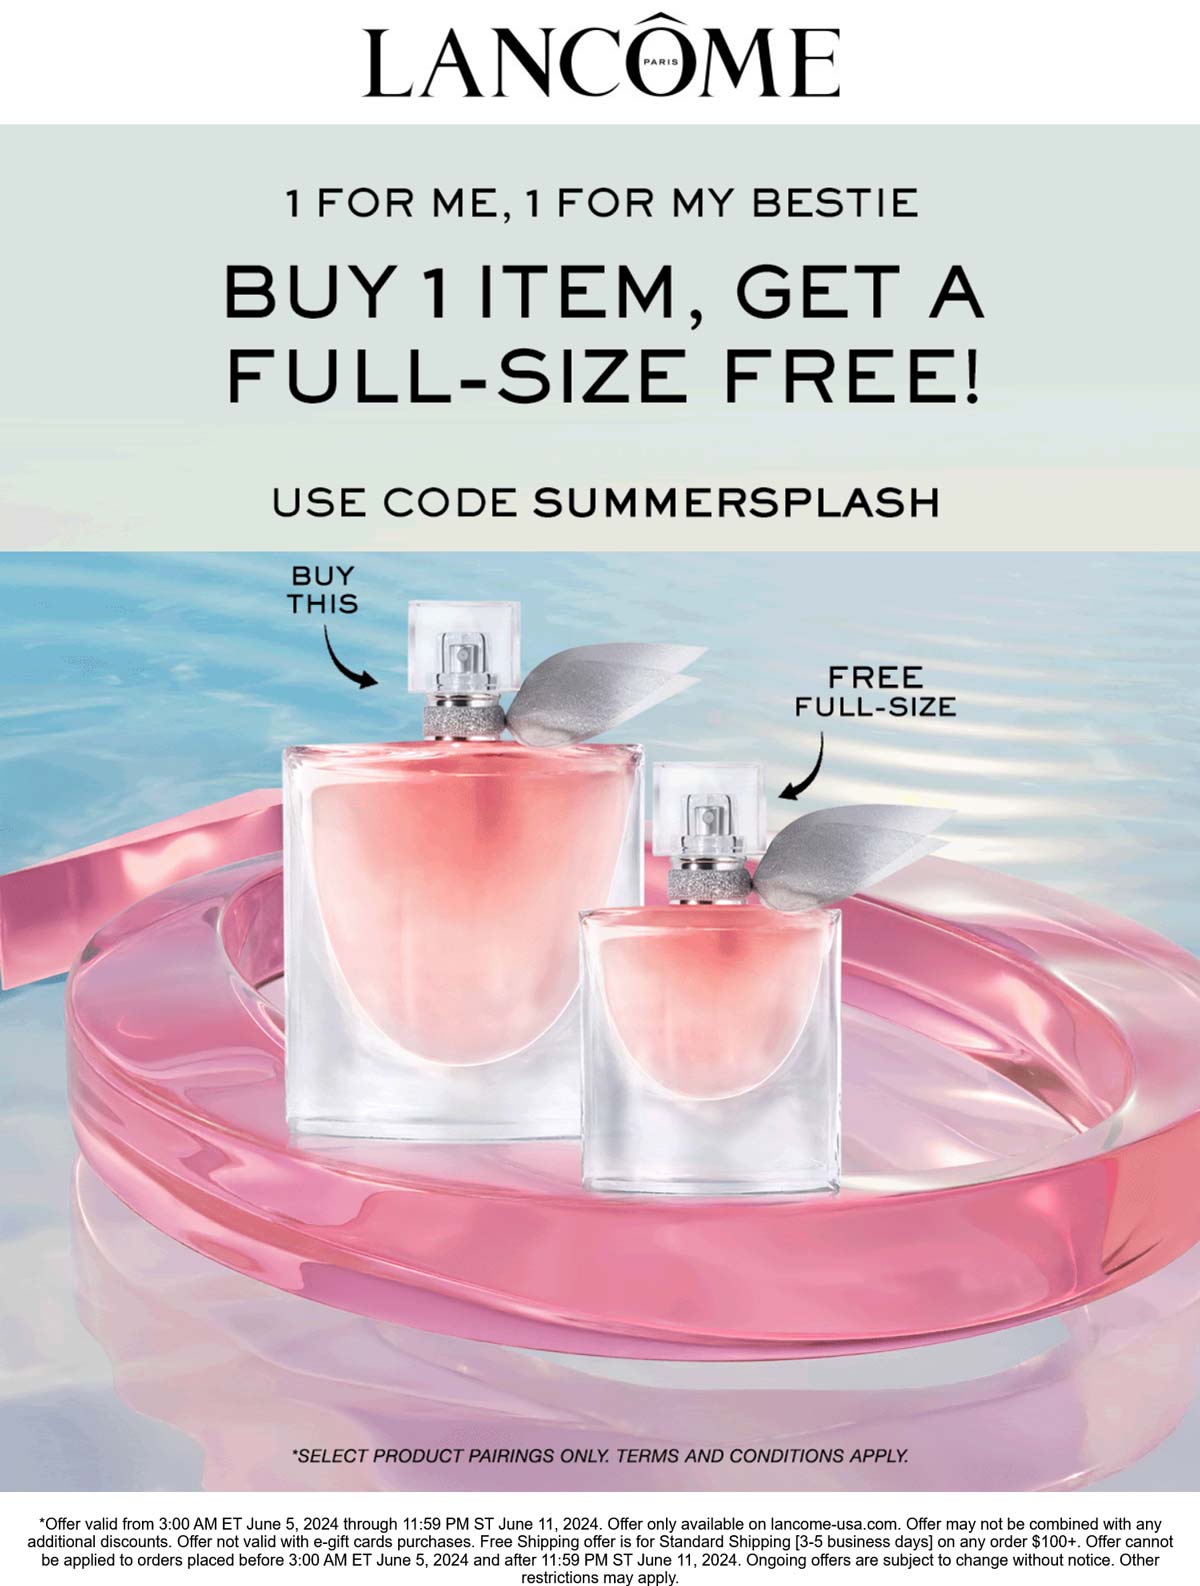 Lancome stores Coupon  Free full size with any item online at Lancome via promo code SUMMERSPLASH #lancome 